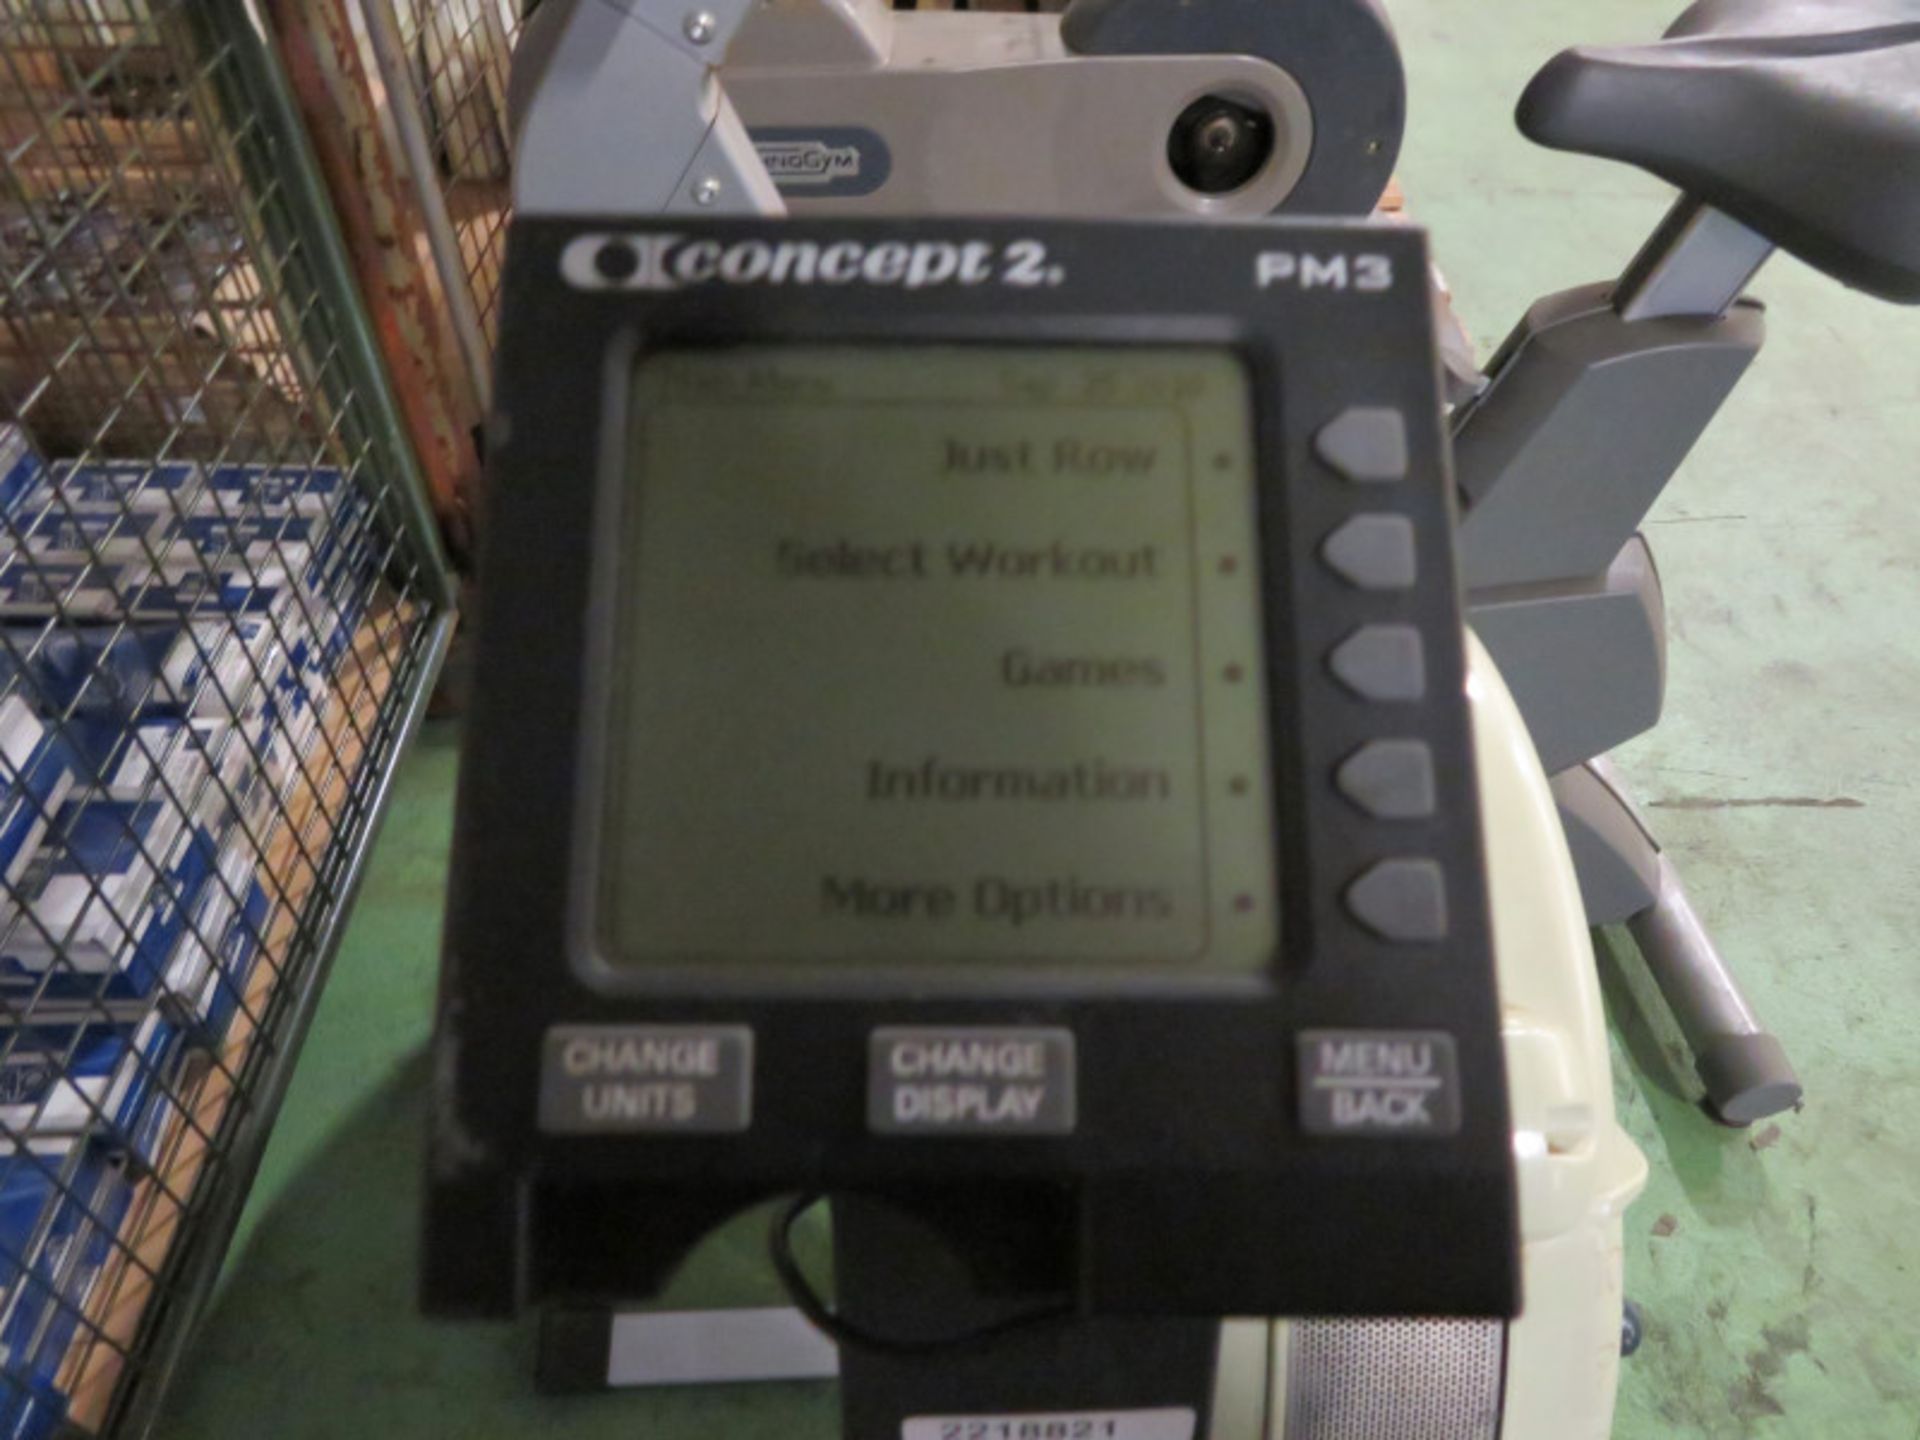 Concept 2 Rowing Machine with PM3 display unit - Image 6 of 6